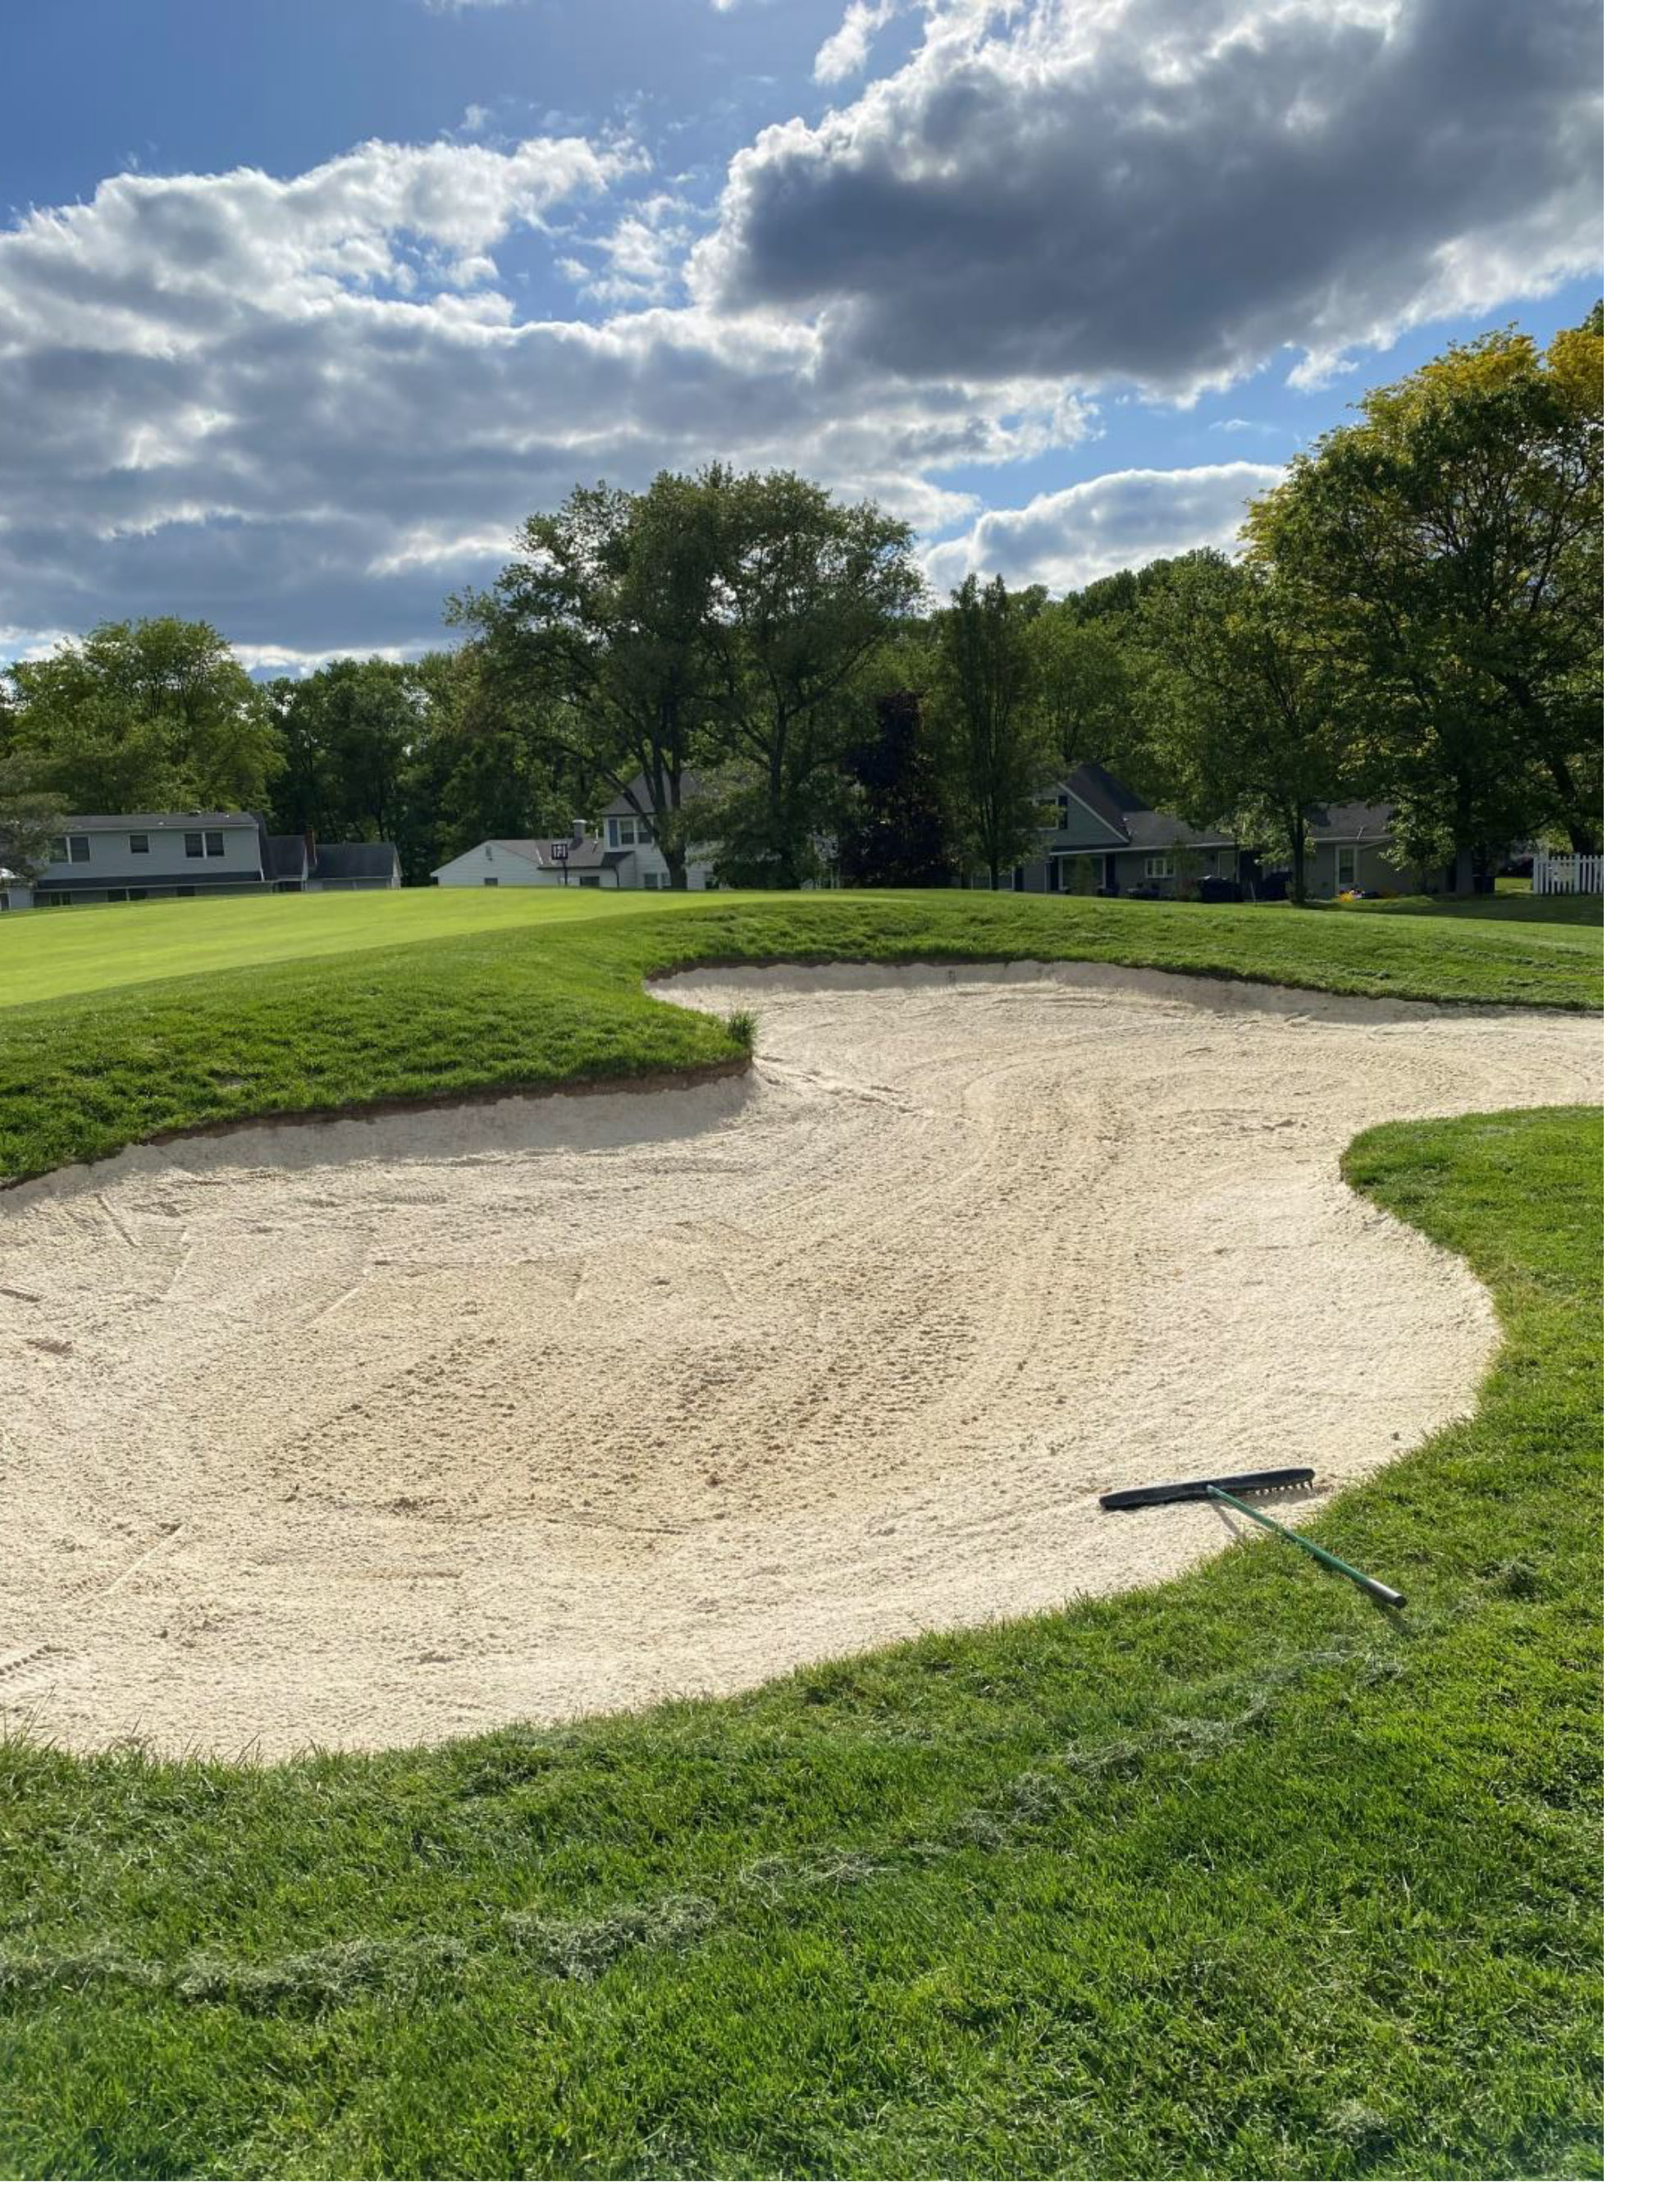 Bunker on golf course